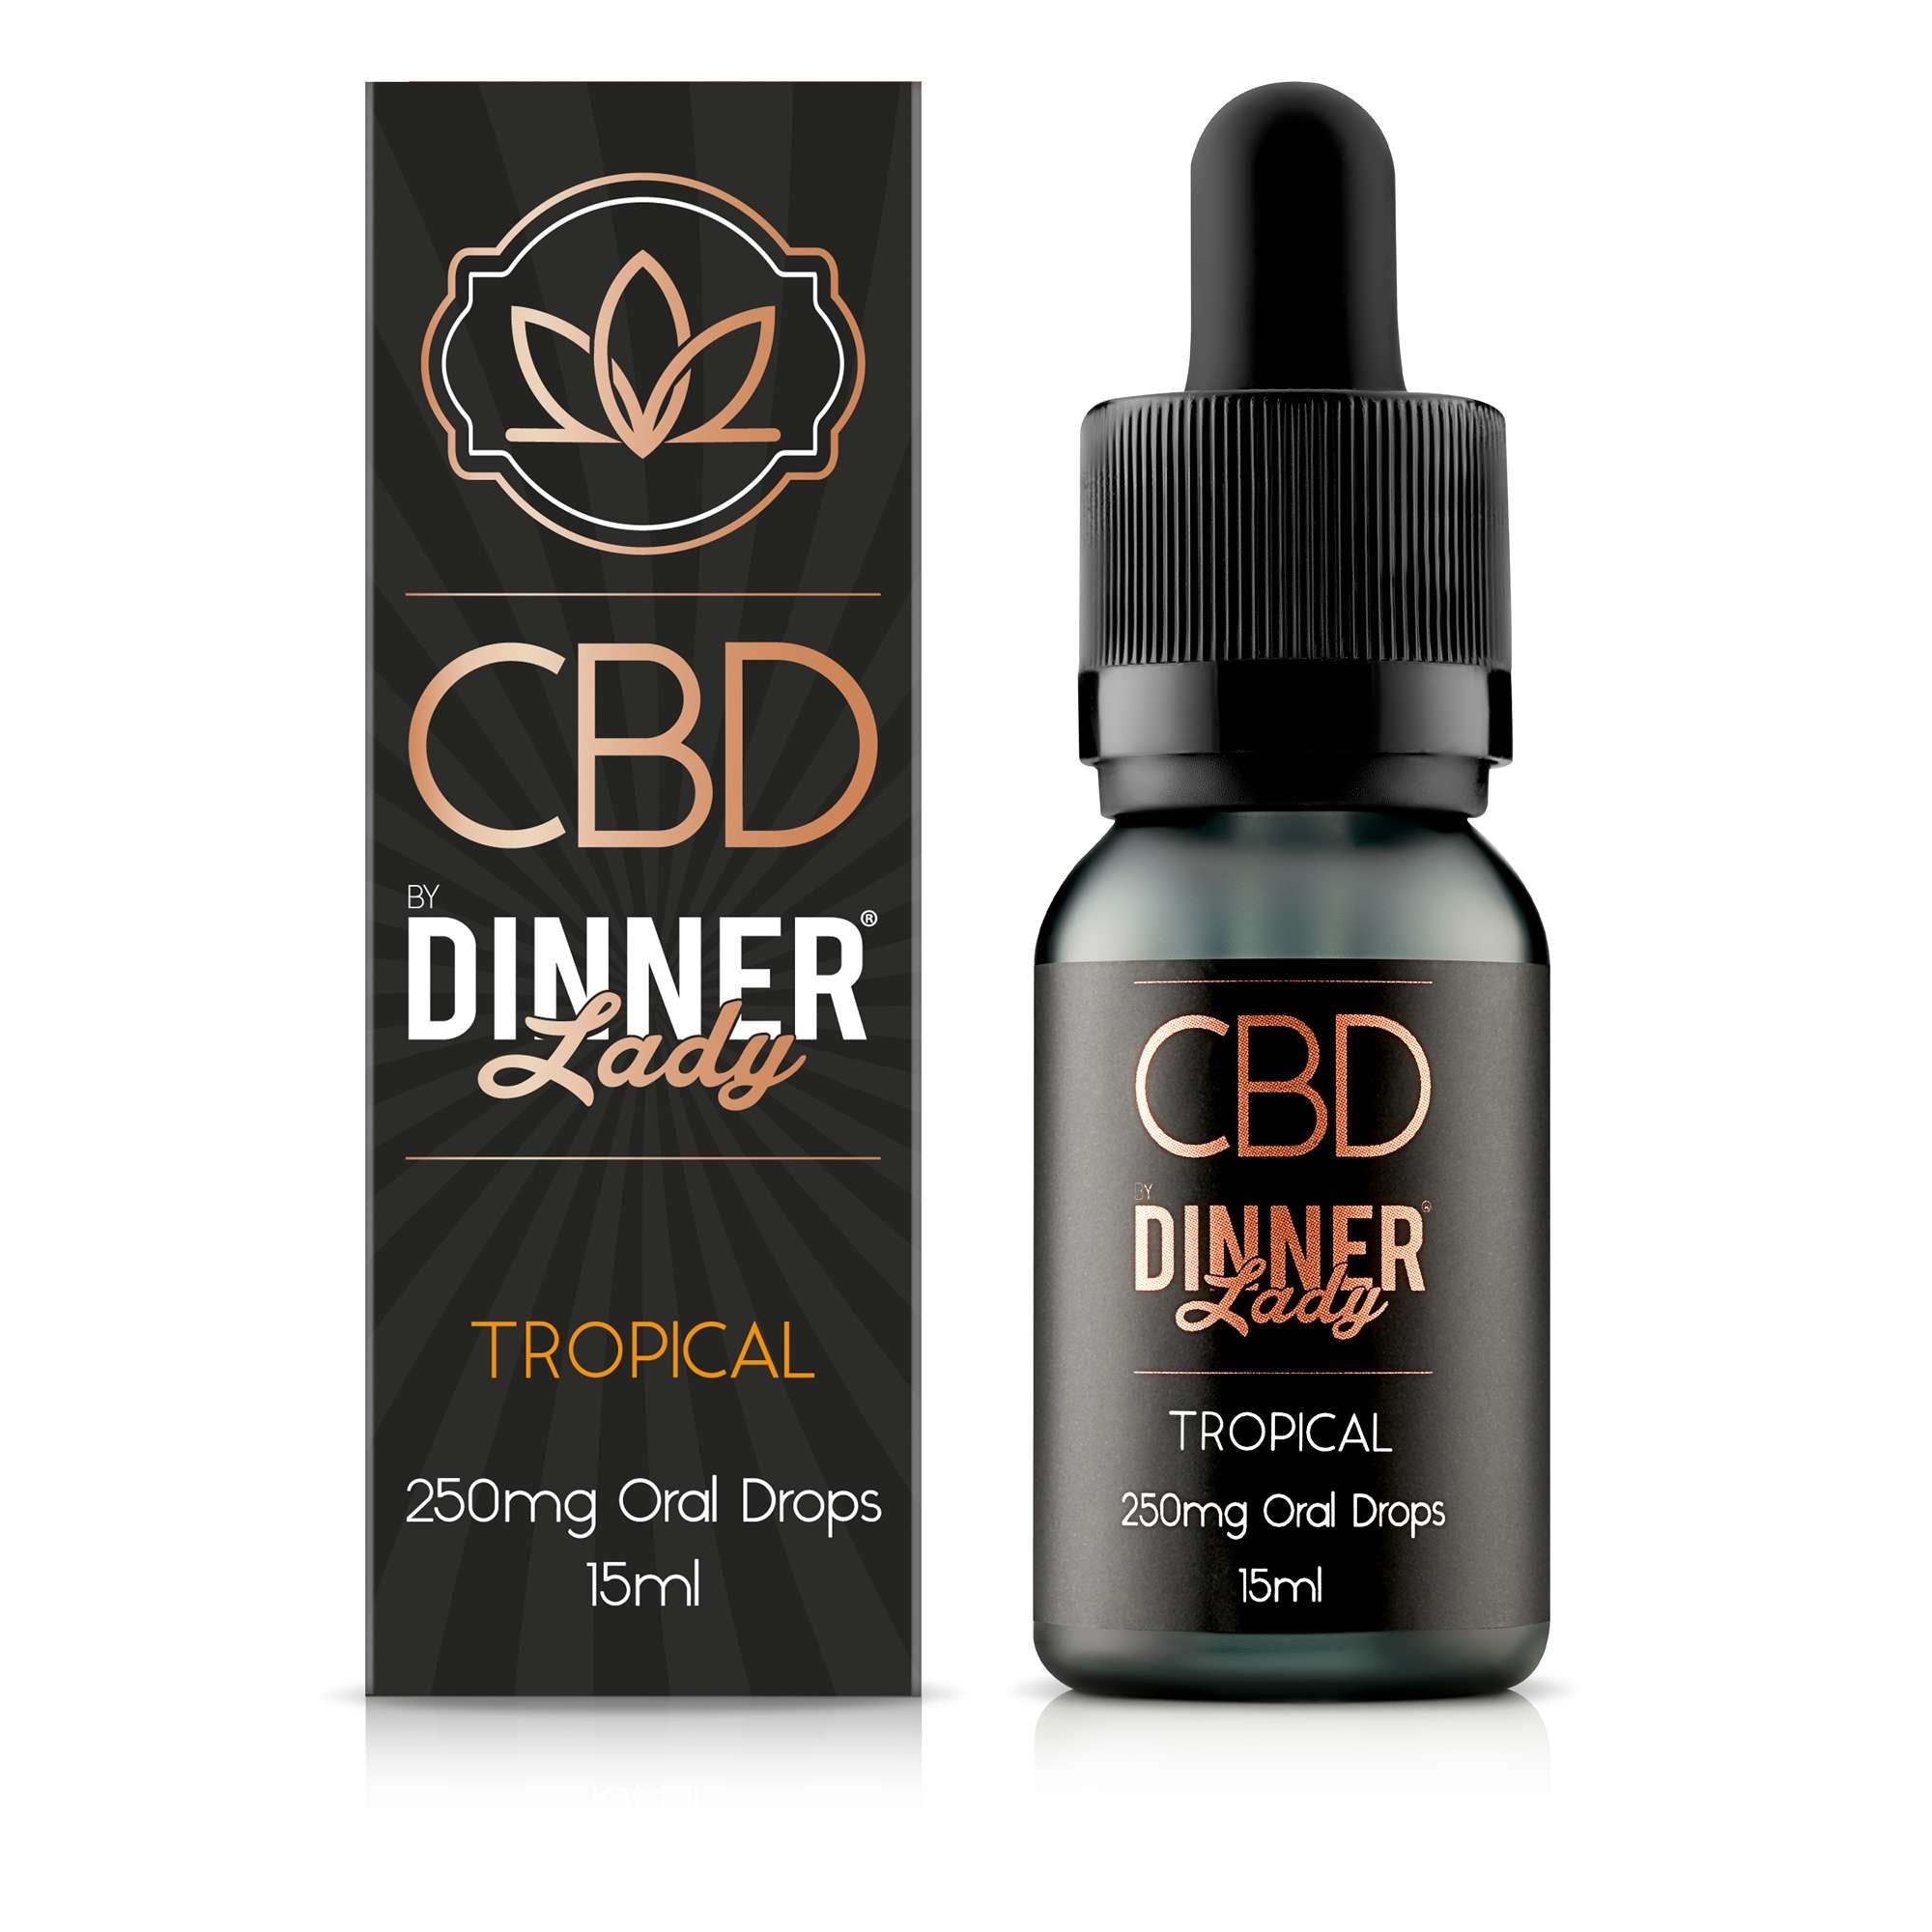 Dinner Lady CBD Tropical oral drops / tinctures - 15ml - 250mg